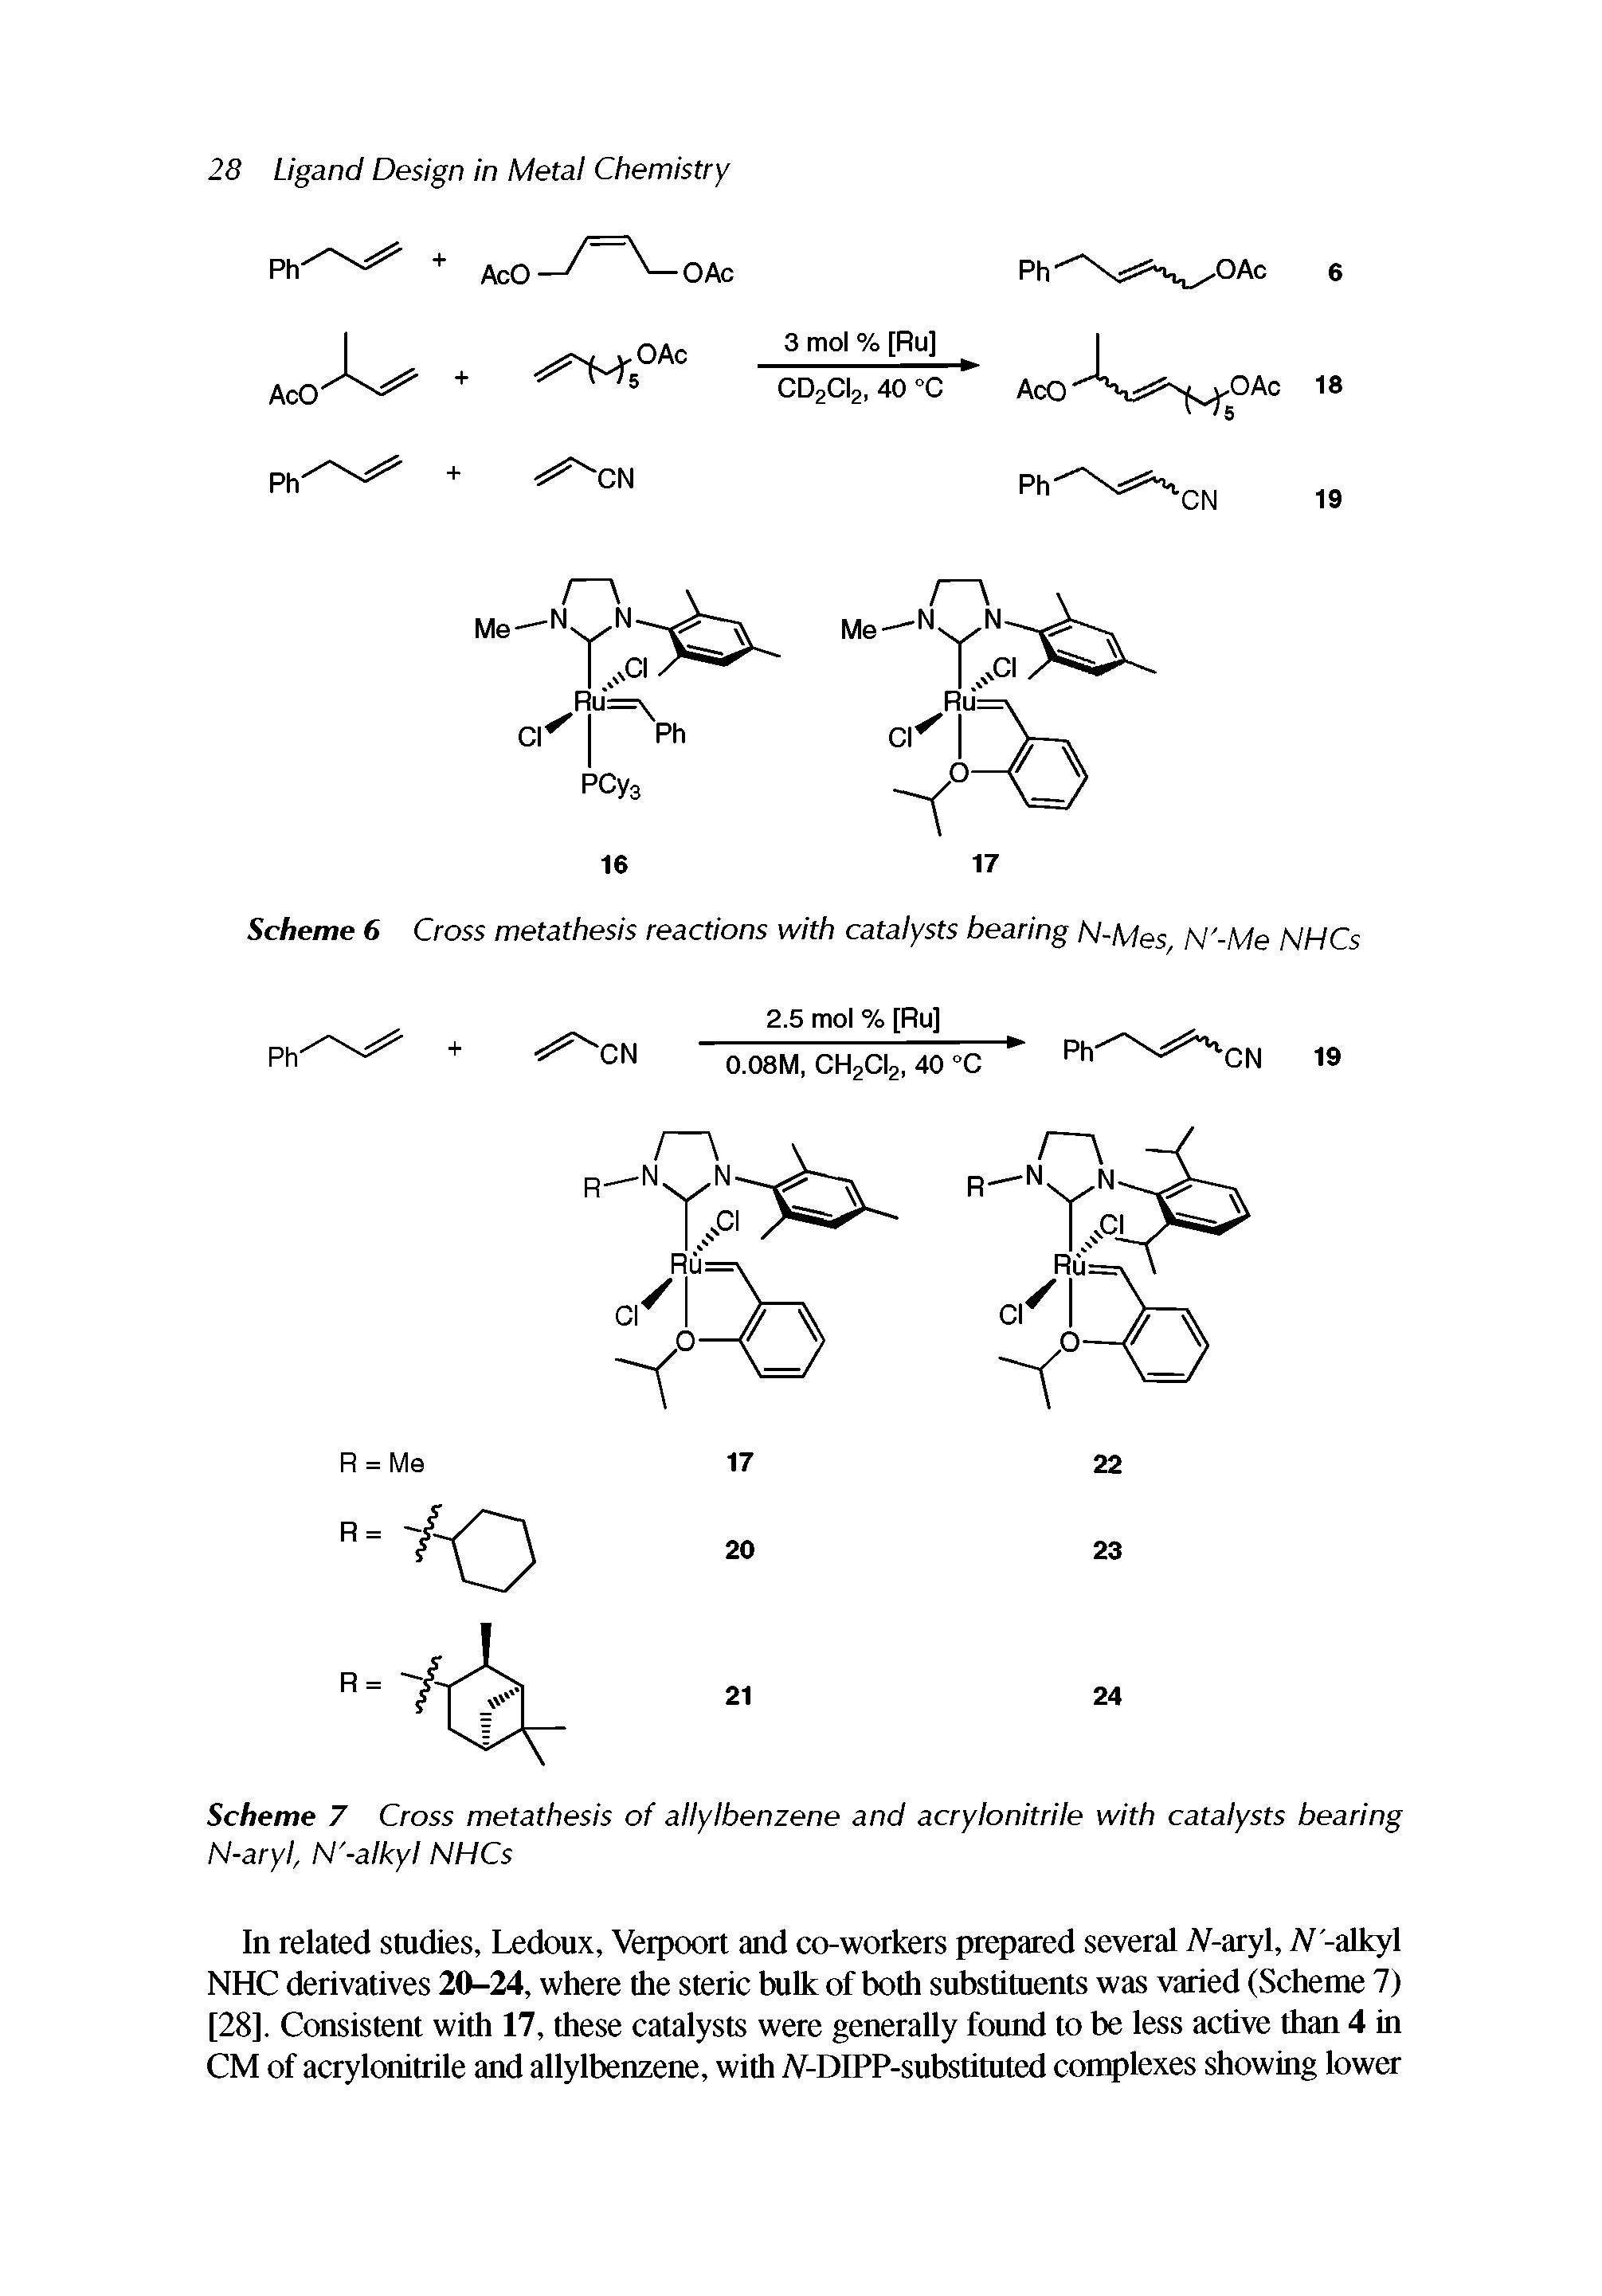 Scheme 7 Cross metathesis of allylbenzene and acrylonitrile with catalysts bearing N-aryl, N -alkyl NHCs...